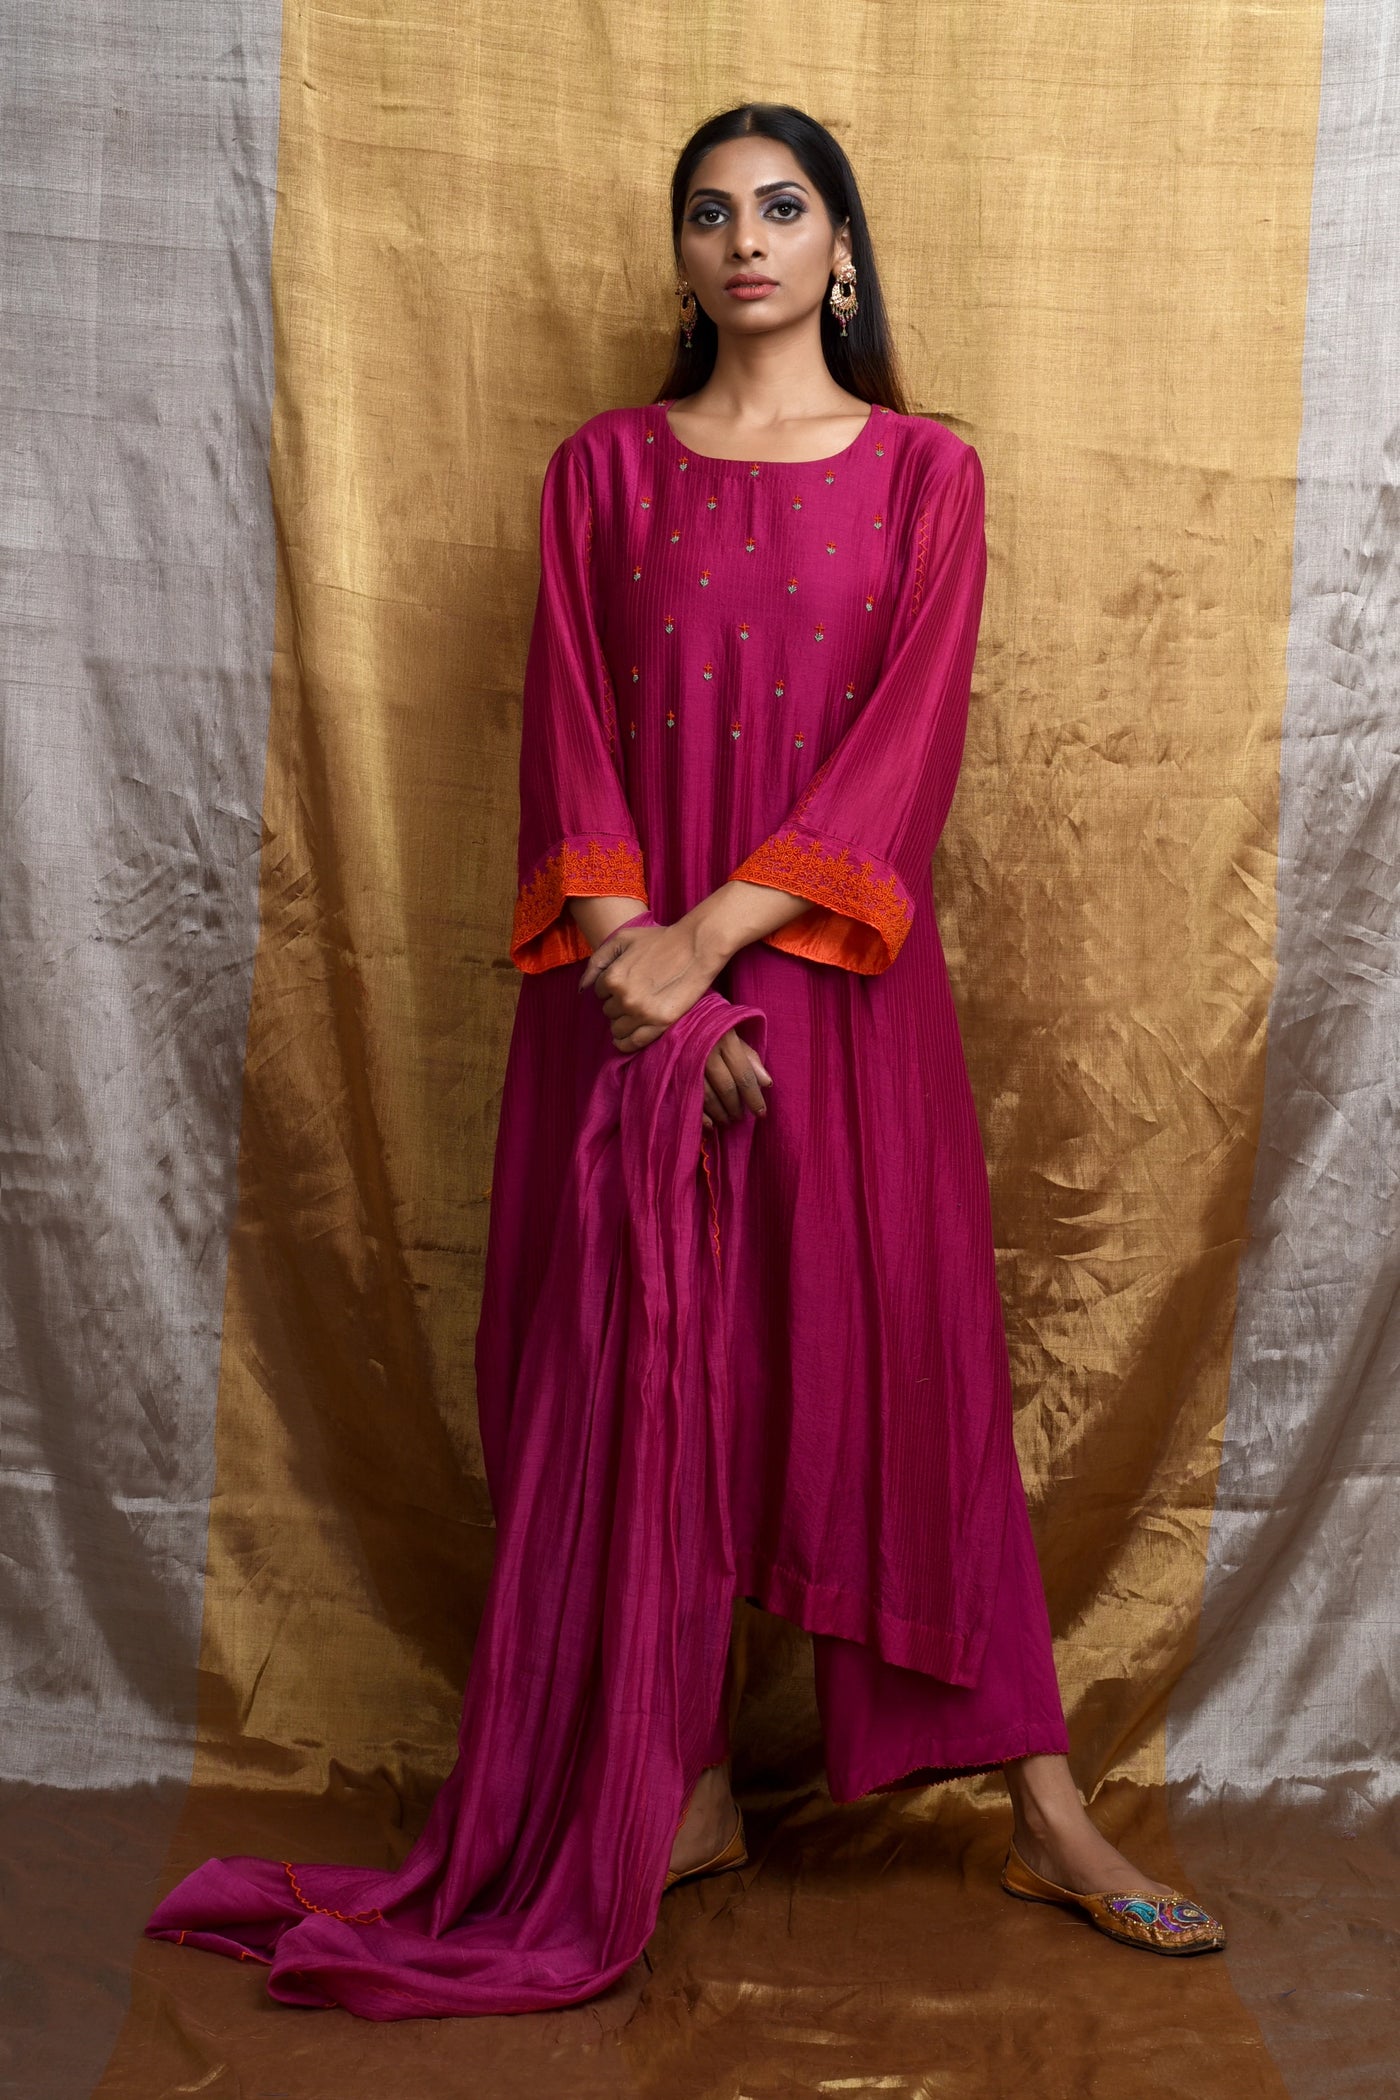 Fuchsia kurta Set - Indian Clothing in Denver, CO, Aurora, CO, Boulder, CO, Fort Collins, CO, Colorado Springs, CO, Parker, CO, Highlands Ranch, CO, Cherry Creek, CO, Centennial, CO, and Longmont, CO. Nationwide shipping USA - India Fashion X